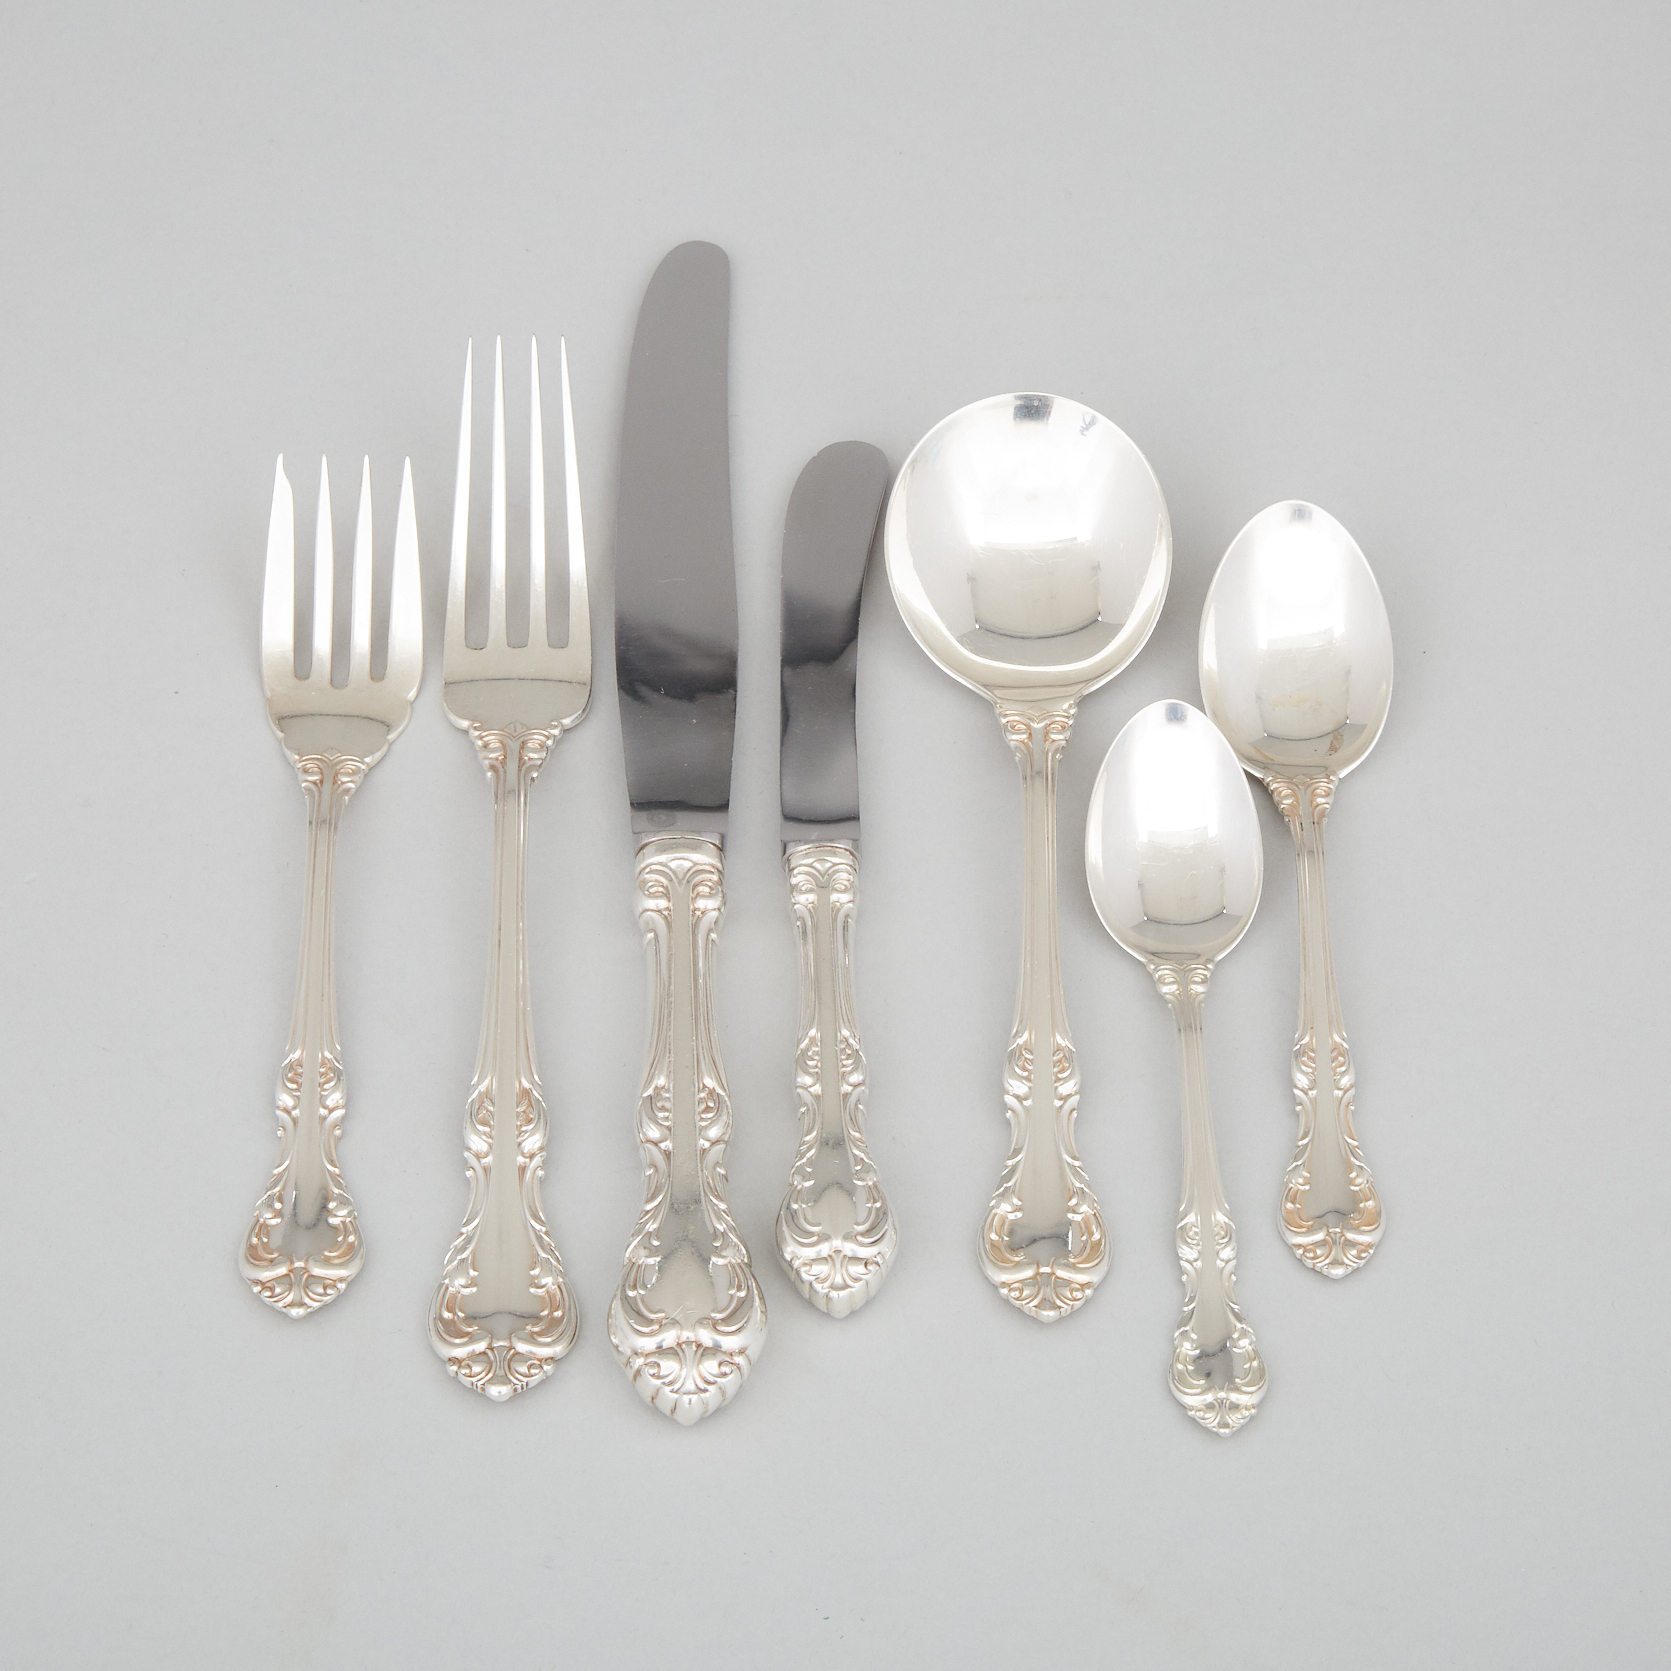 Canadian Silver 'Laurentian' Pattern Flatware, Henry Birks & Sons, Montreal, Que., 20th century